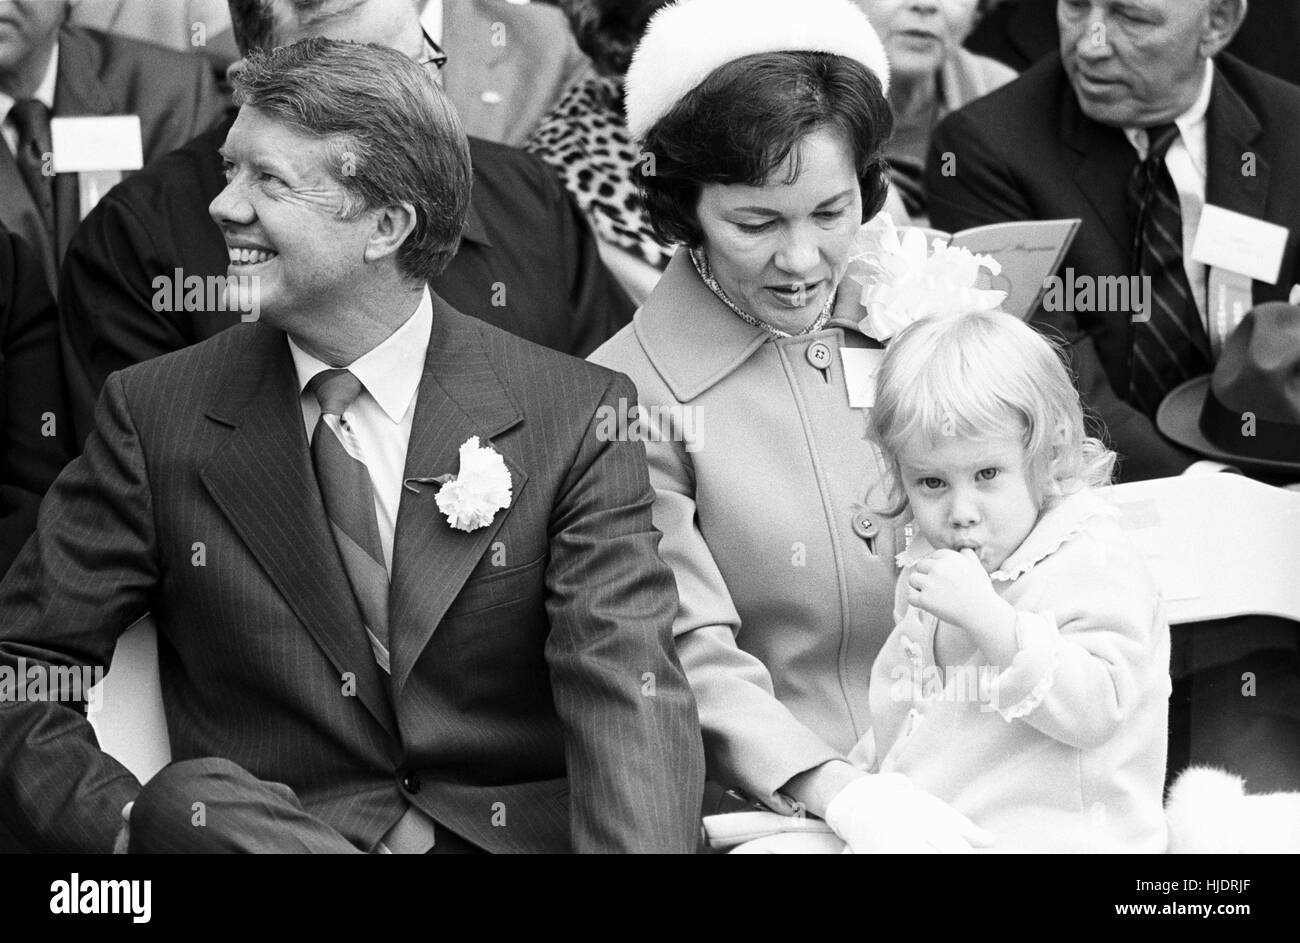 Georgia state senator and governor elect Jimmy Carter at his 1971 gubernatorial inauguration. Carter succeeded segregationist Lester Maddox as Georgia governor. Carter is seated with his wife Rosalyn and daughter Amy. Stock Photo